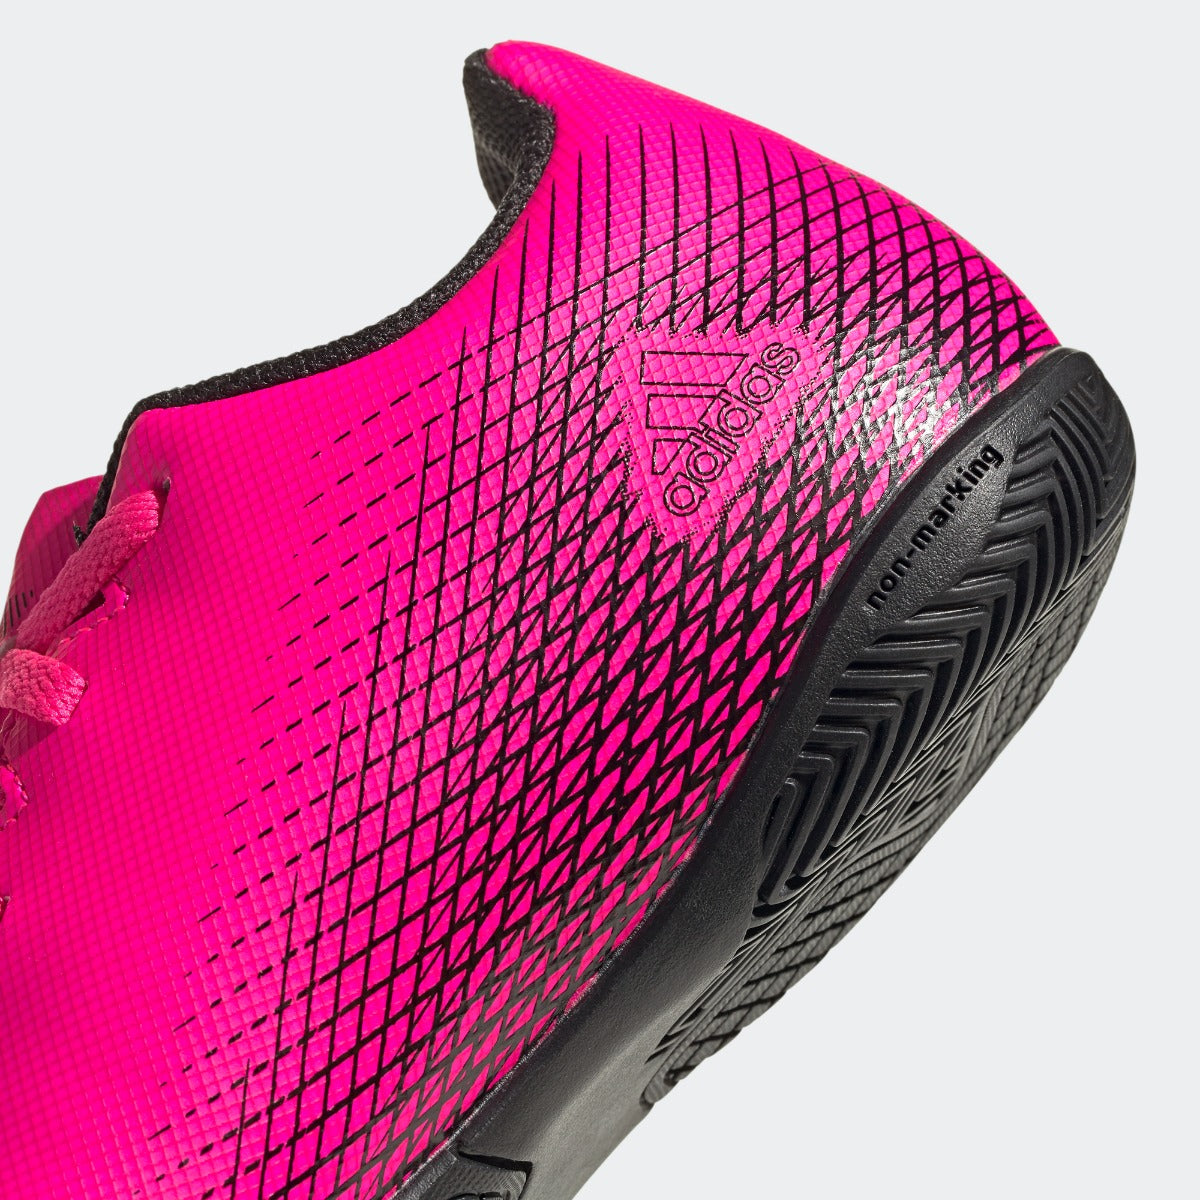 Adidas JR X Ghosted .4 IN - Pink-Black (Detail 1)